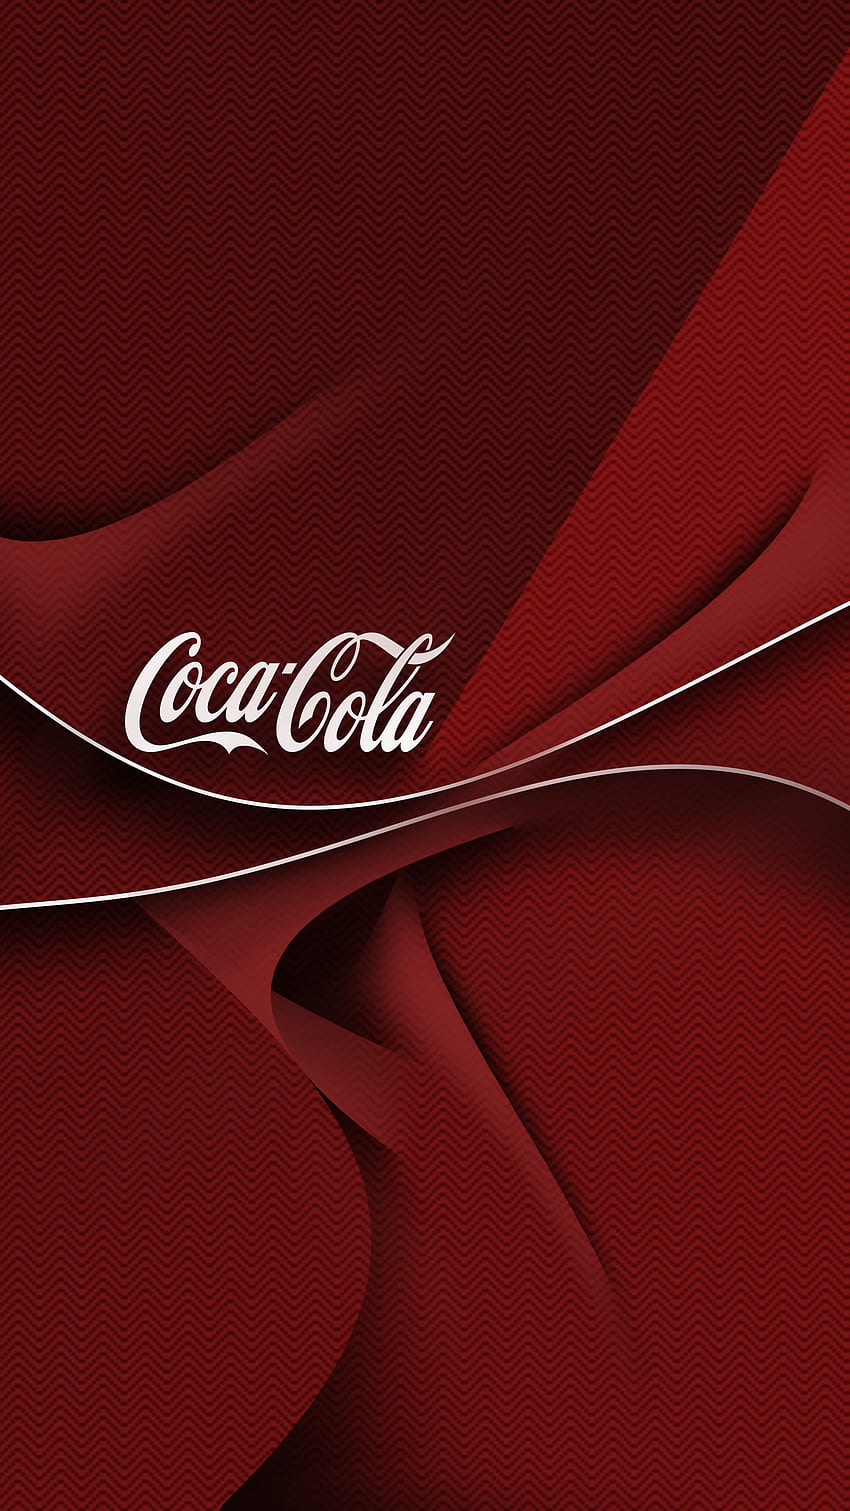 Android I use on my Samsung Luna older, Coca-Cola HD phone wallpaper